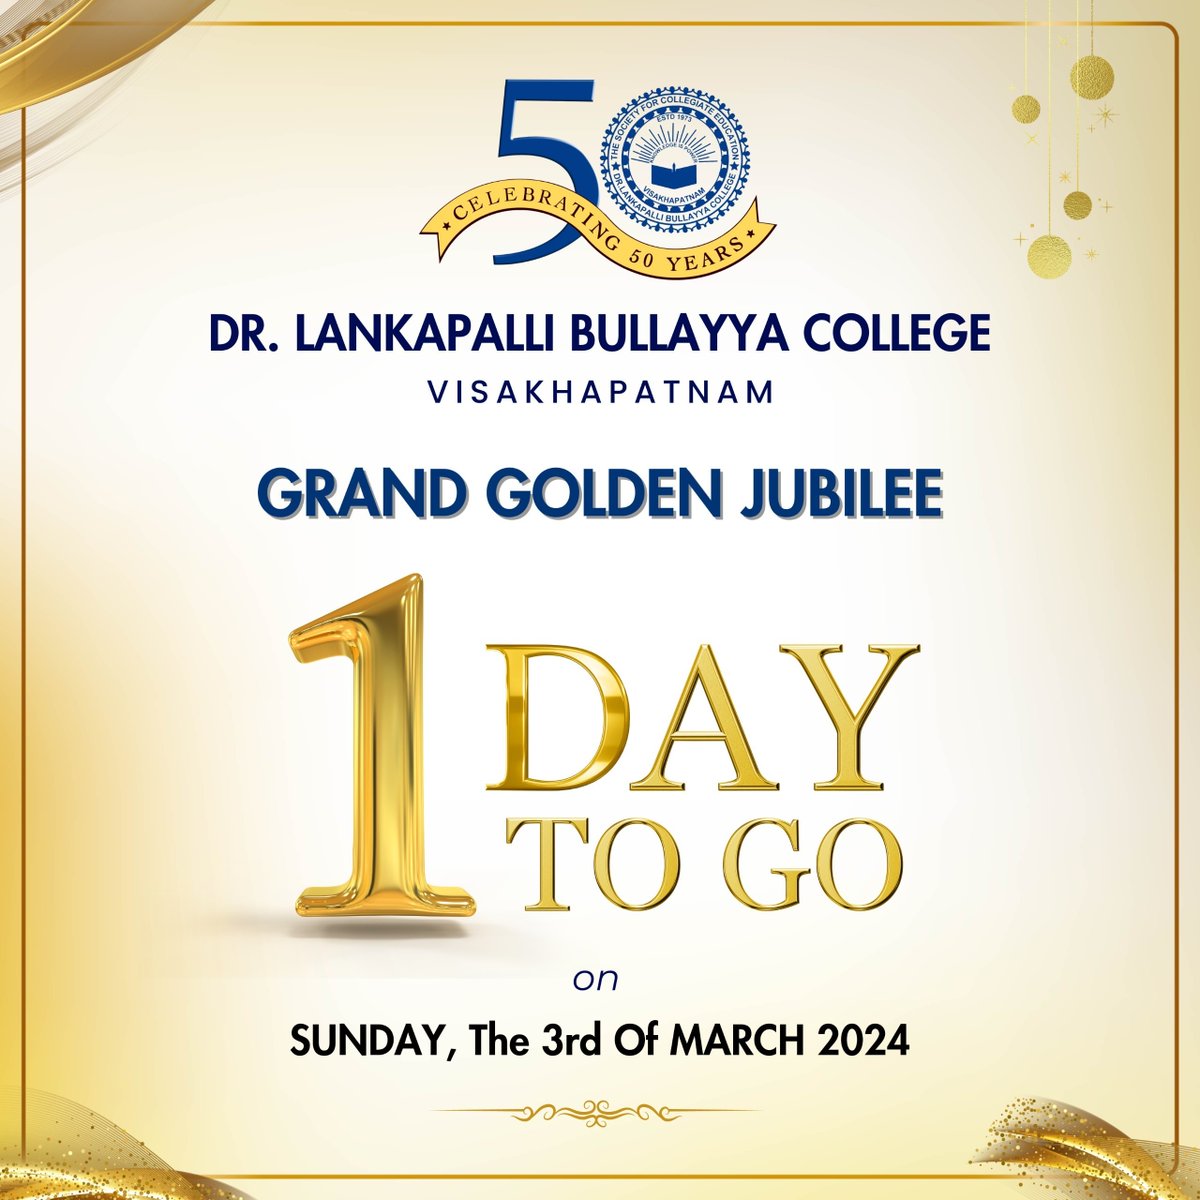 🎉 1 day to go! 🎉

One day to go for grand celebration of Dr. Lankapalli Bullayya College's 50th anniversary! Calling all esteemed alumni to be a part of GOLDEN JUBILEE Celebrations on Sunday, the 3rd of March 2024.

#LBC50Years #GoldenJubilee #AlumniReunion #DrLBCollege